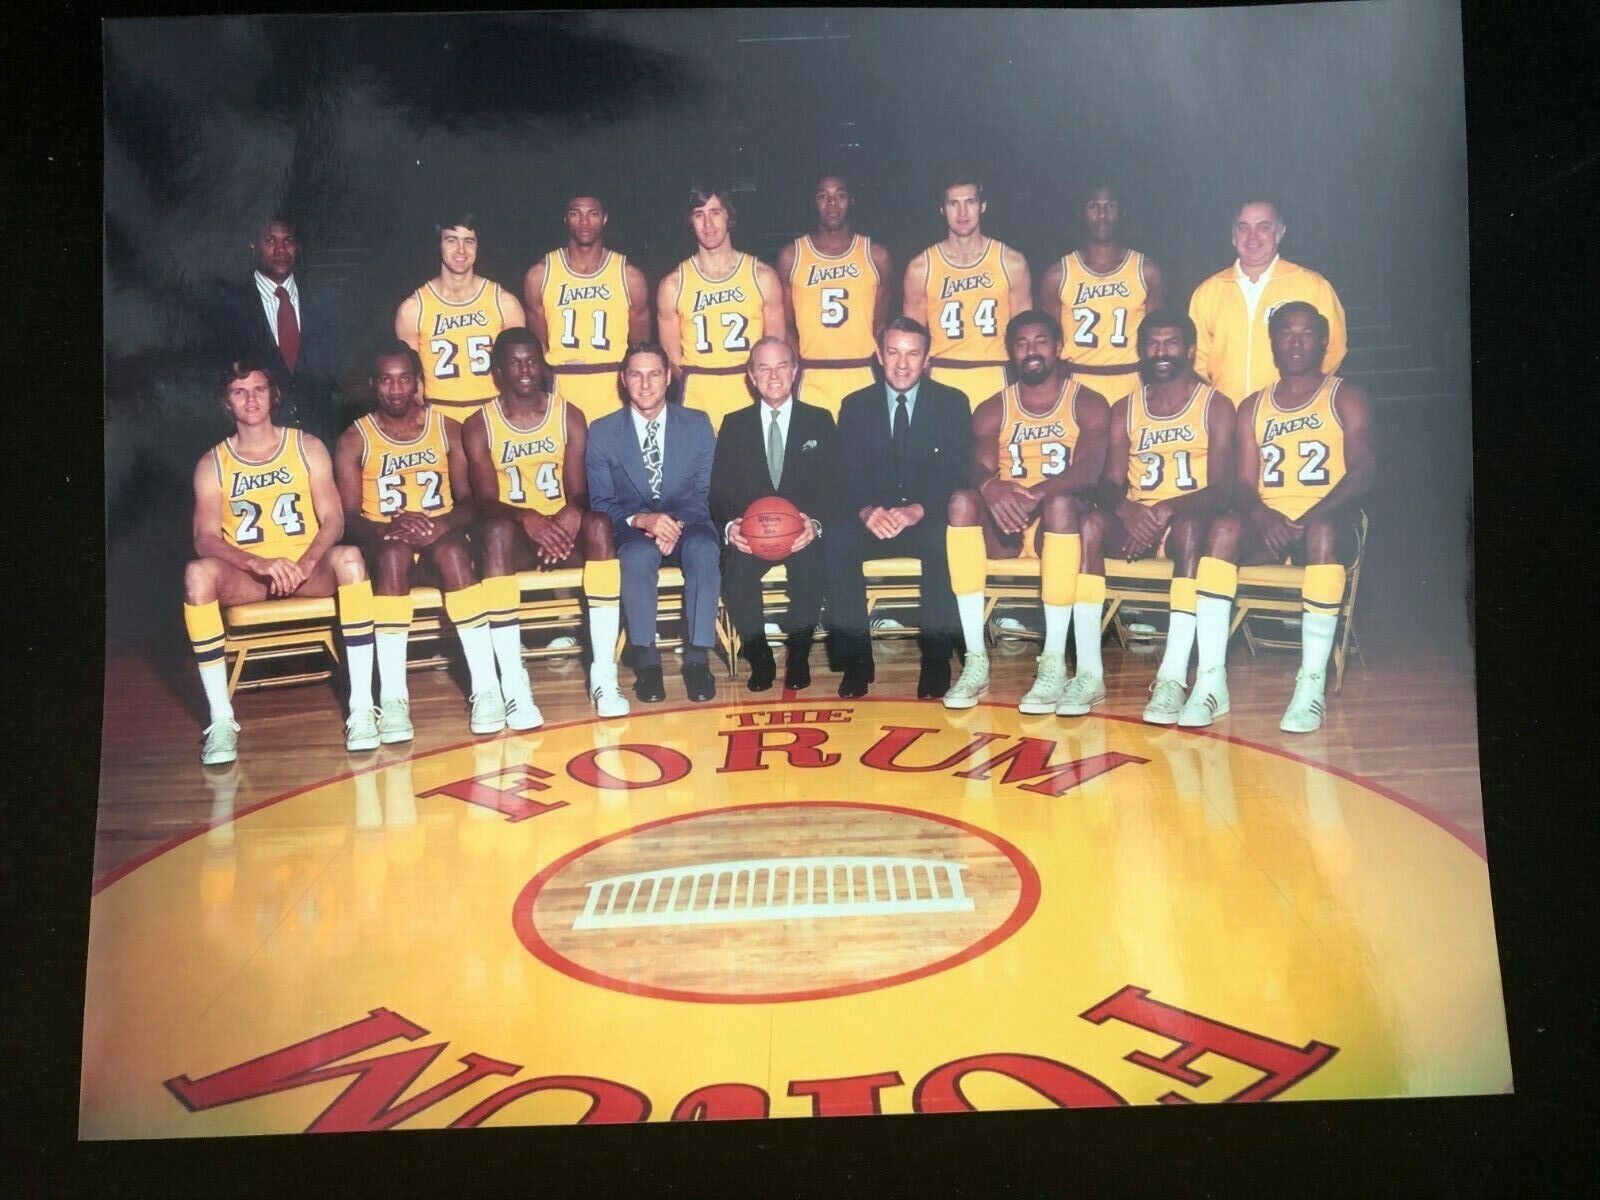 NEW 1971-72 Los Angeles Lakers Team 1st Championship Photo Poster painting High Res Glossy 8x10